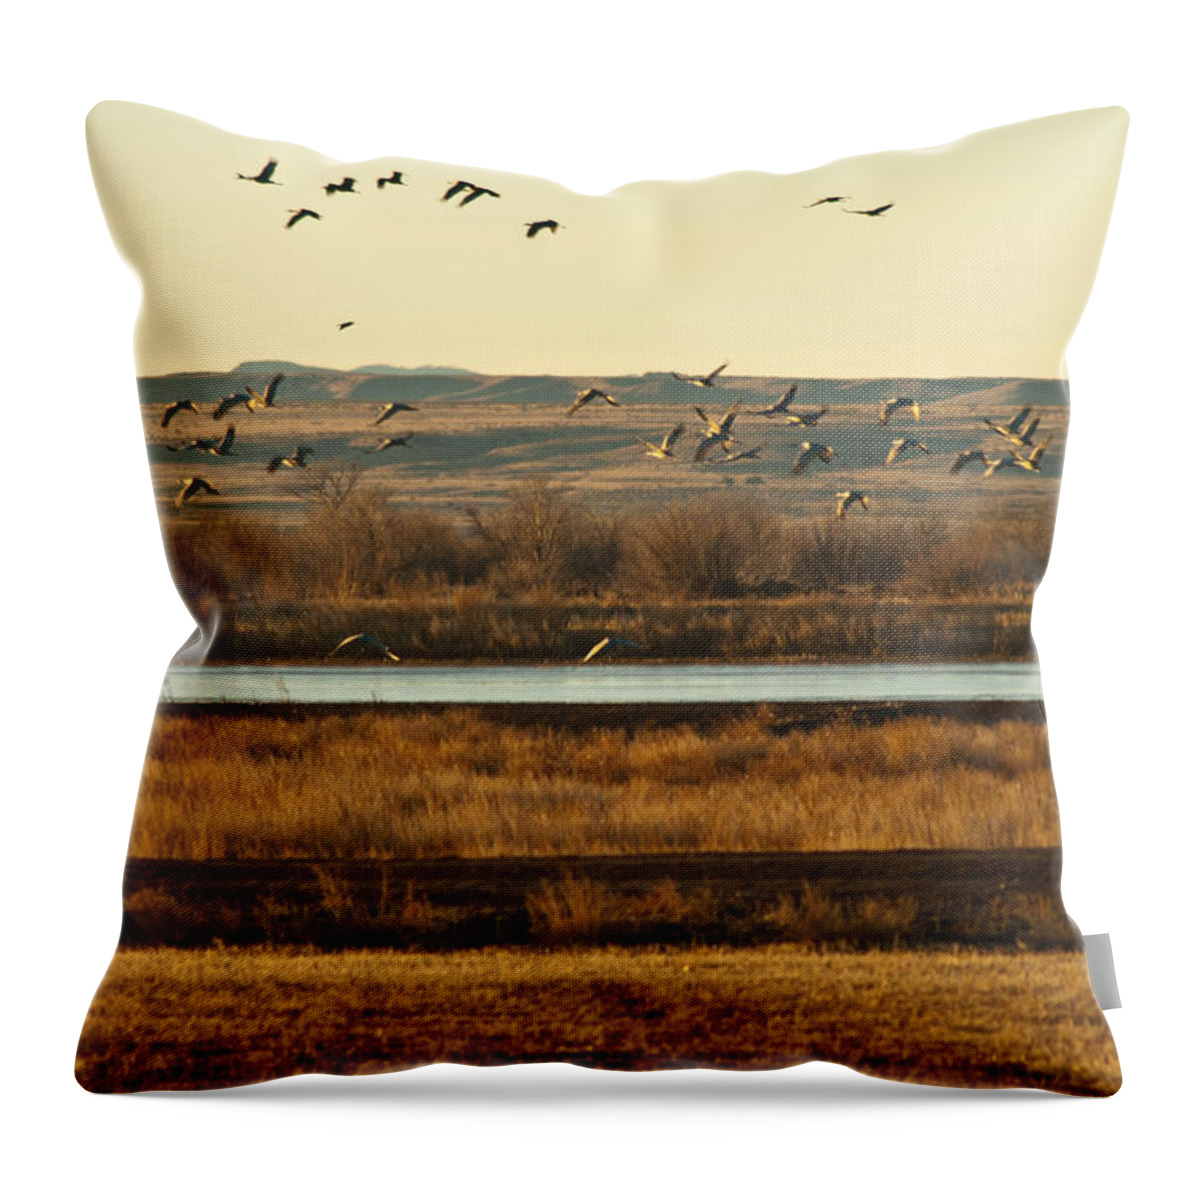  Throw Pillow featuring the photograph Refuge View 6 by James Gay